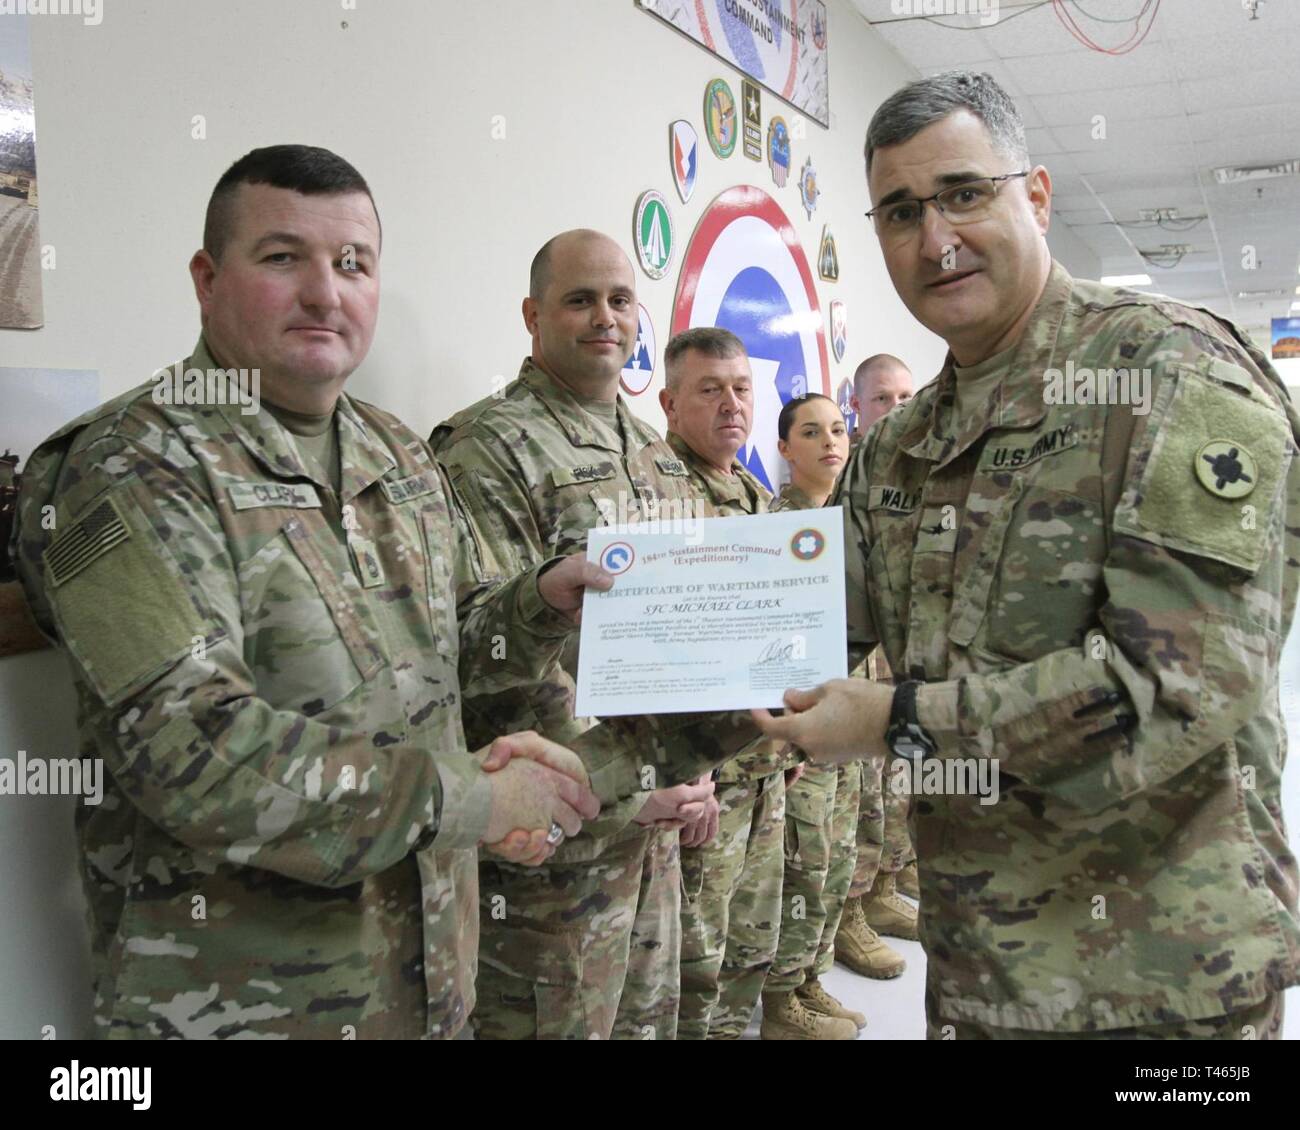 Brig. Gen. Clint E. Walker, commanding general of the 184th Sustainment Command, presents a certificate of wartime service to Sgt. 1st class Michael Clark following the placement of the 184th ESC patch on his right shoulder at Camp Arifjan, Kuwait, Mar. 3, 2019. Stock Photo